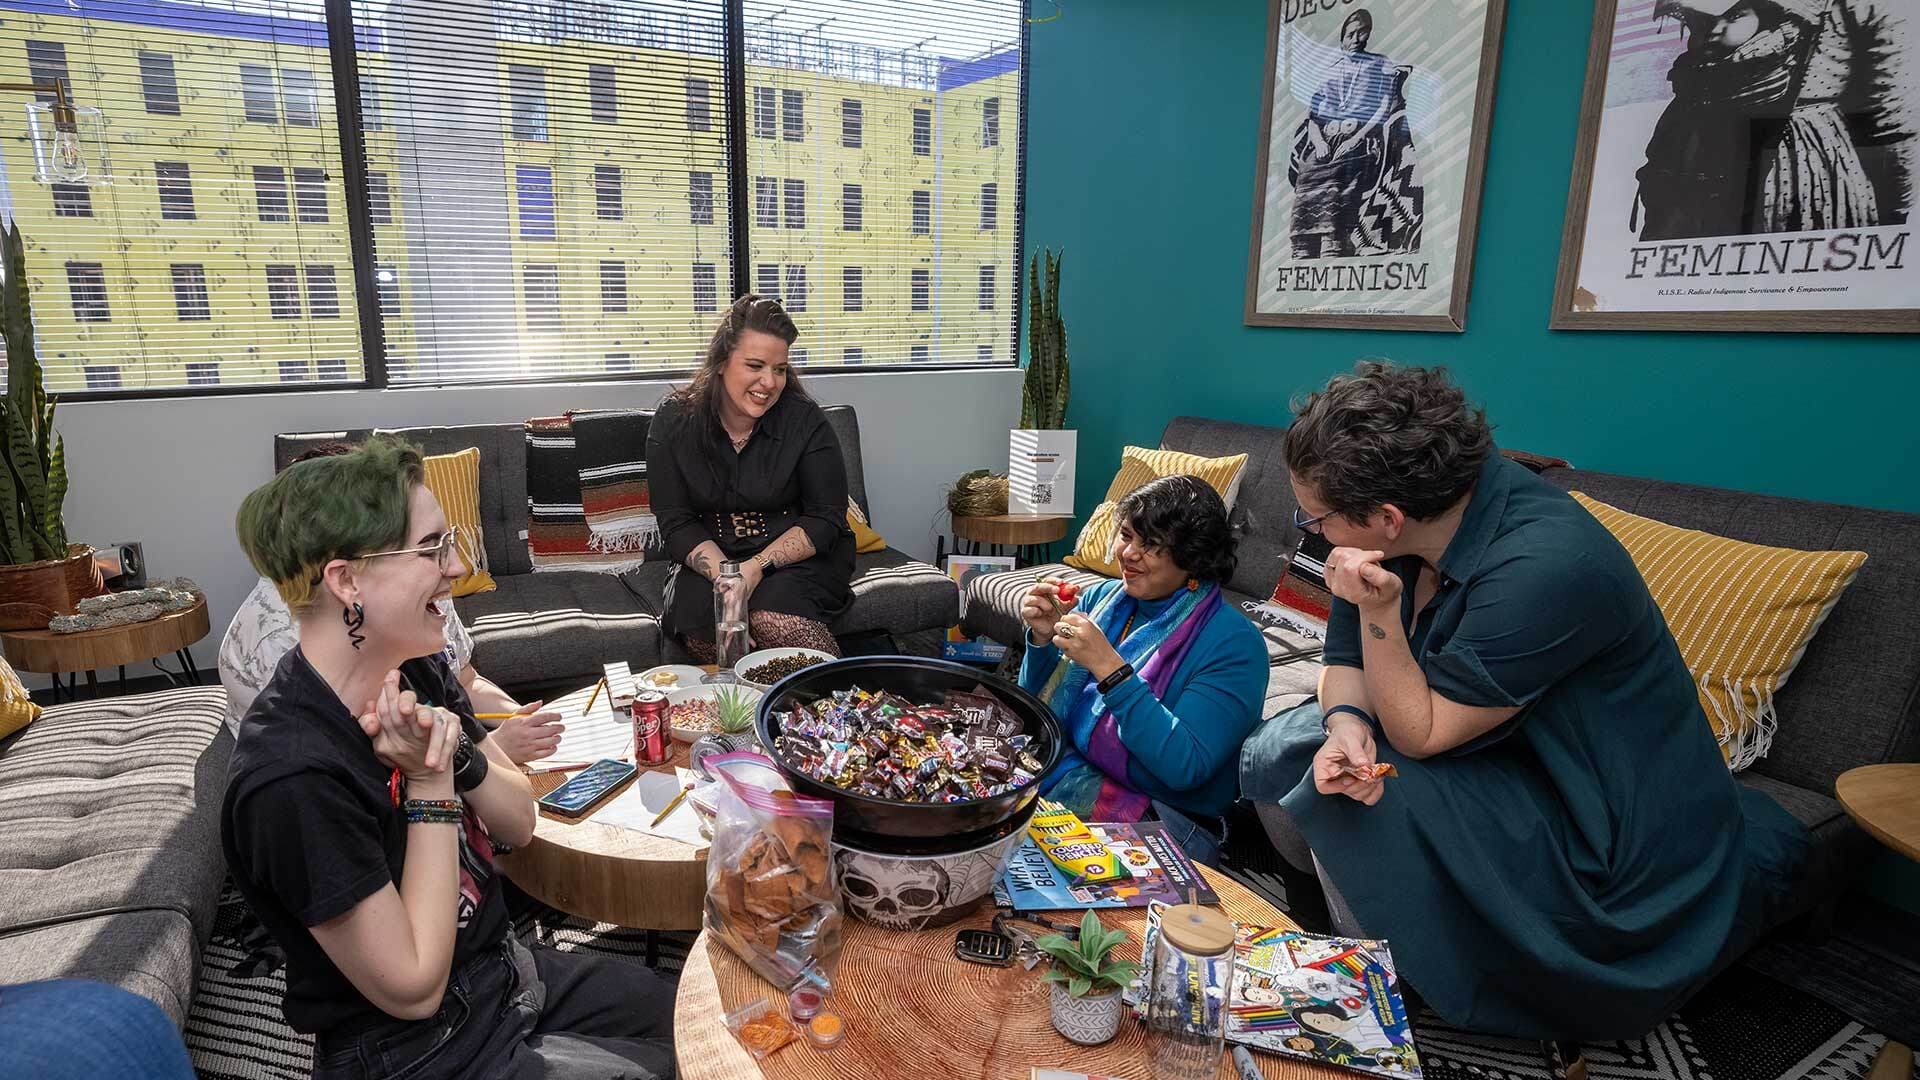 People gathered around wooden tables filled with candy